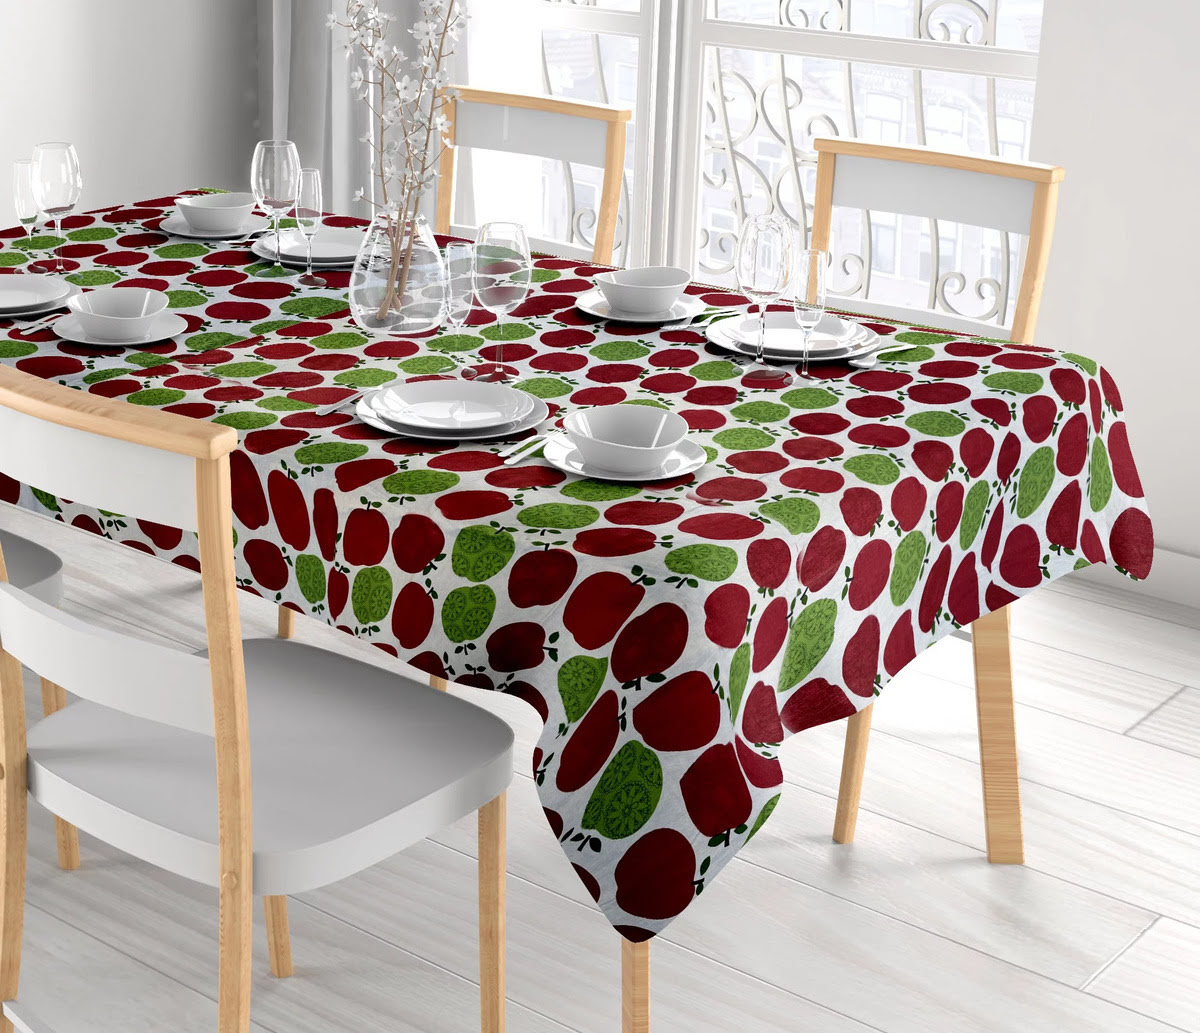 What Size Table Fits A 52 X 70 Tablecloth?